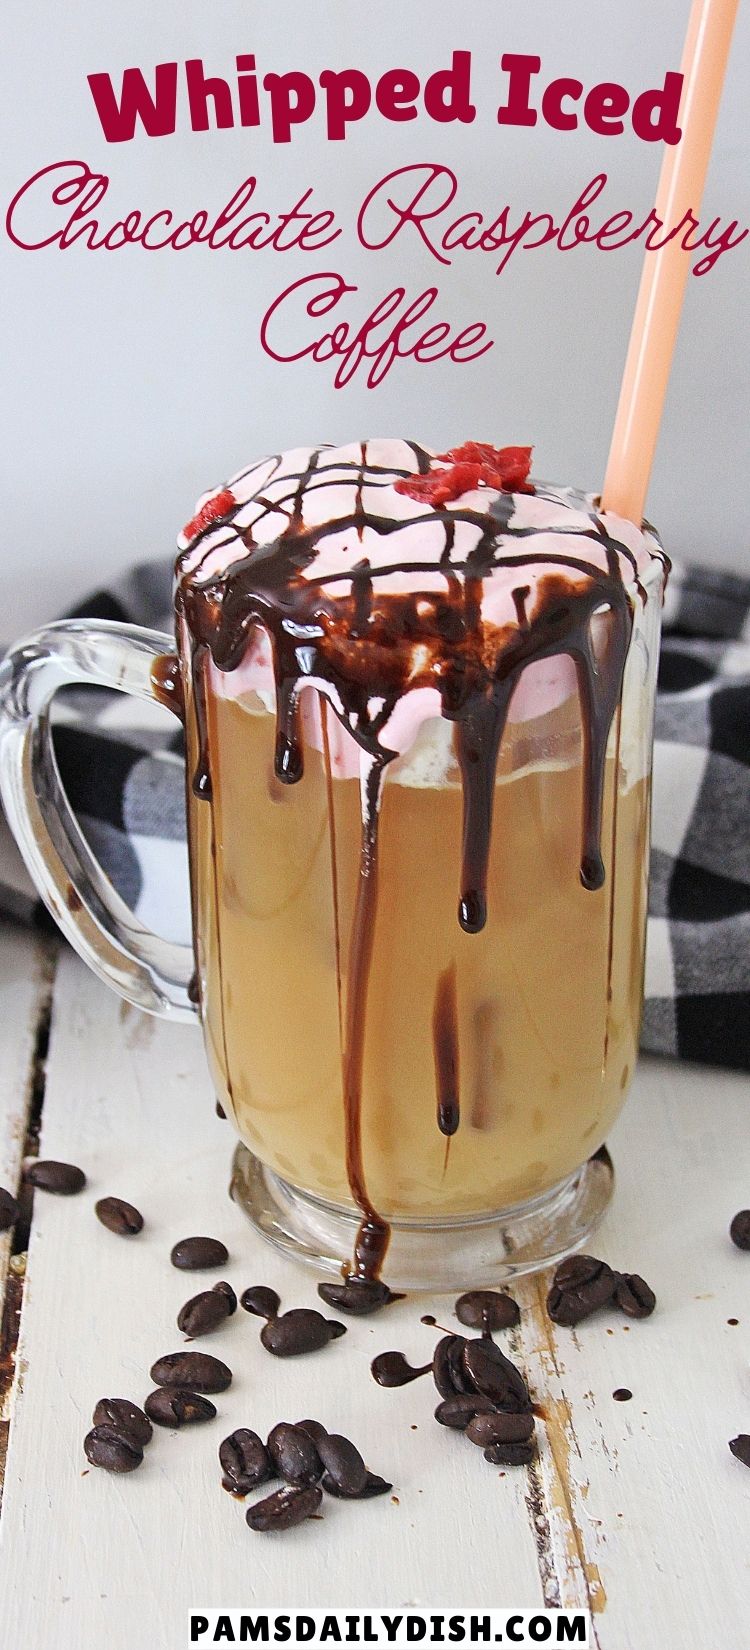 This Whipped Iced Chocolate Raspberry Coffee is the perfect refreshing sweet treat when you are craving something delicious and fruity. via @skinnydesserts